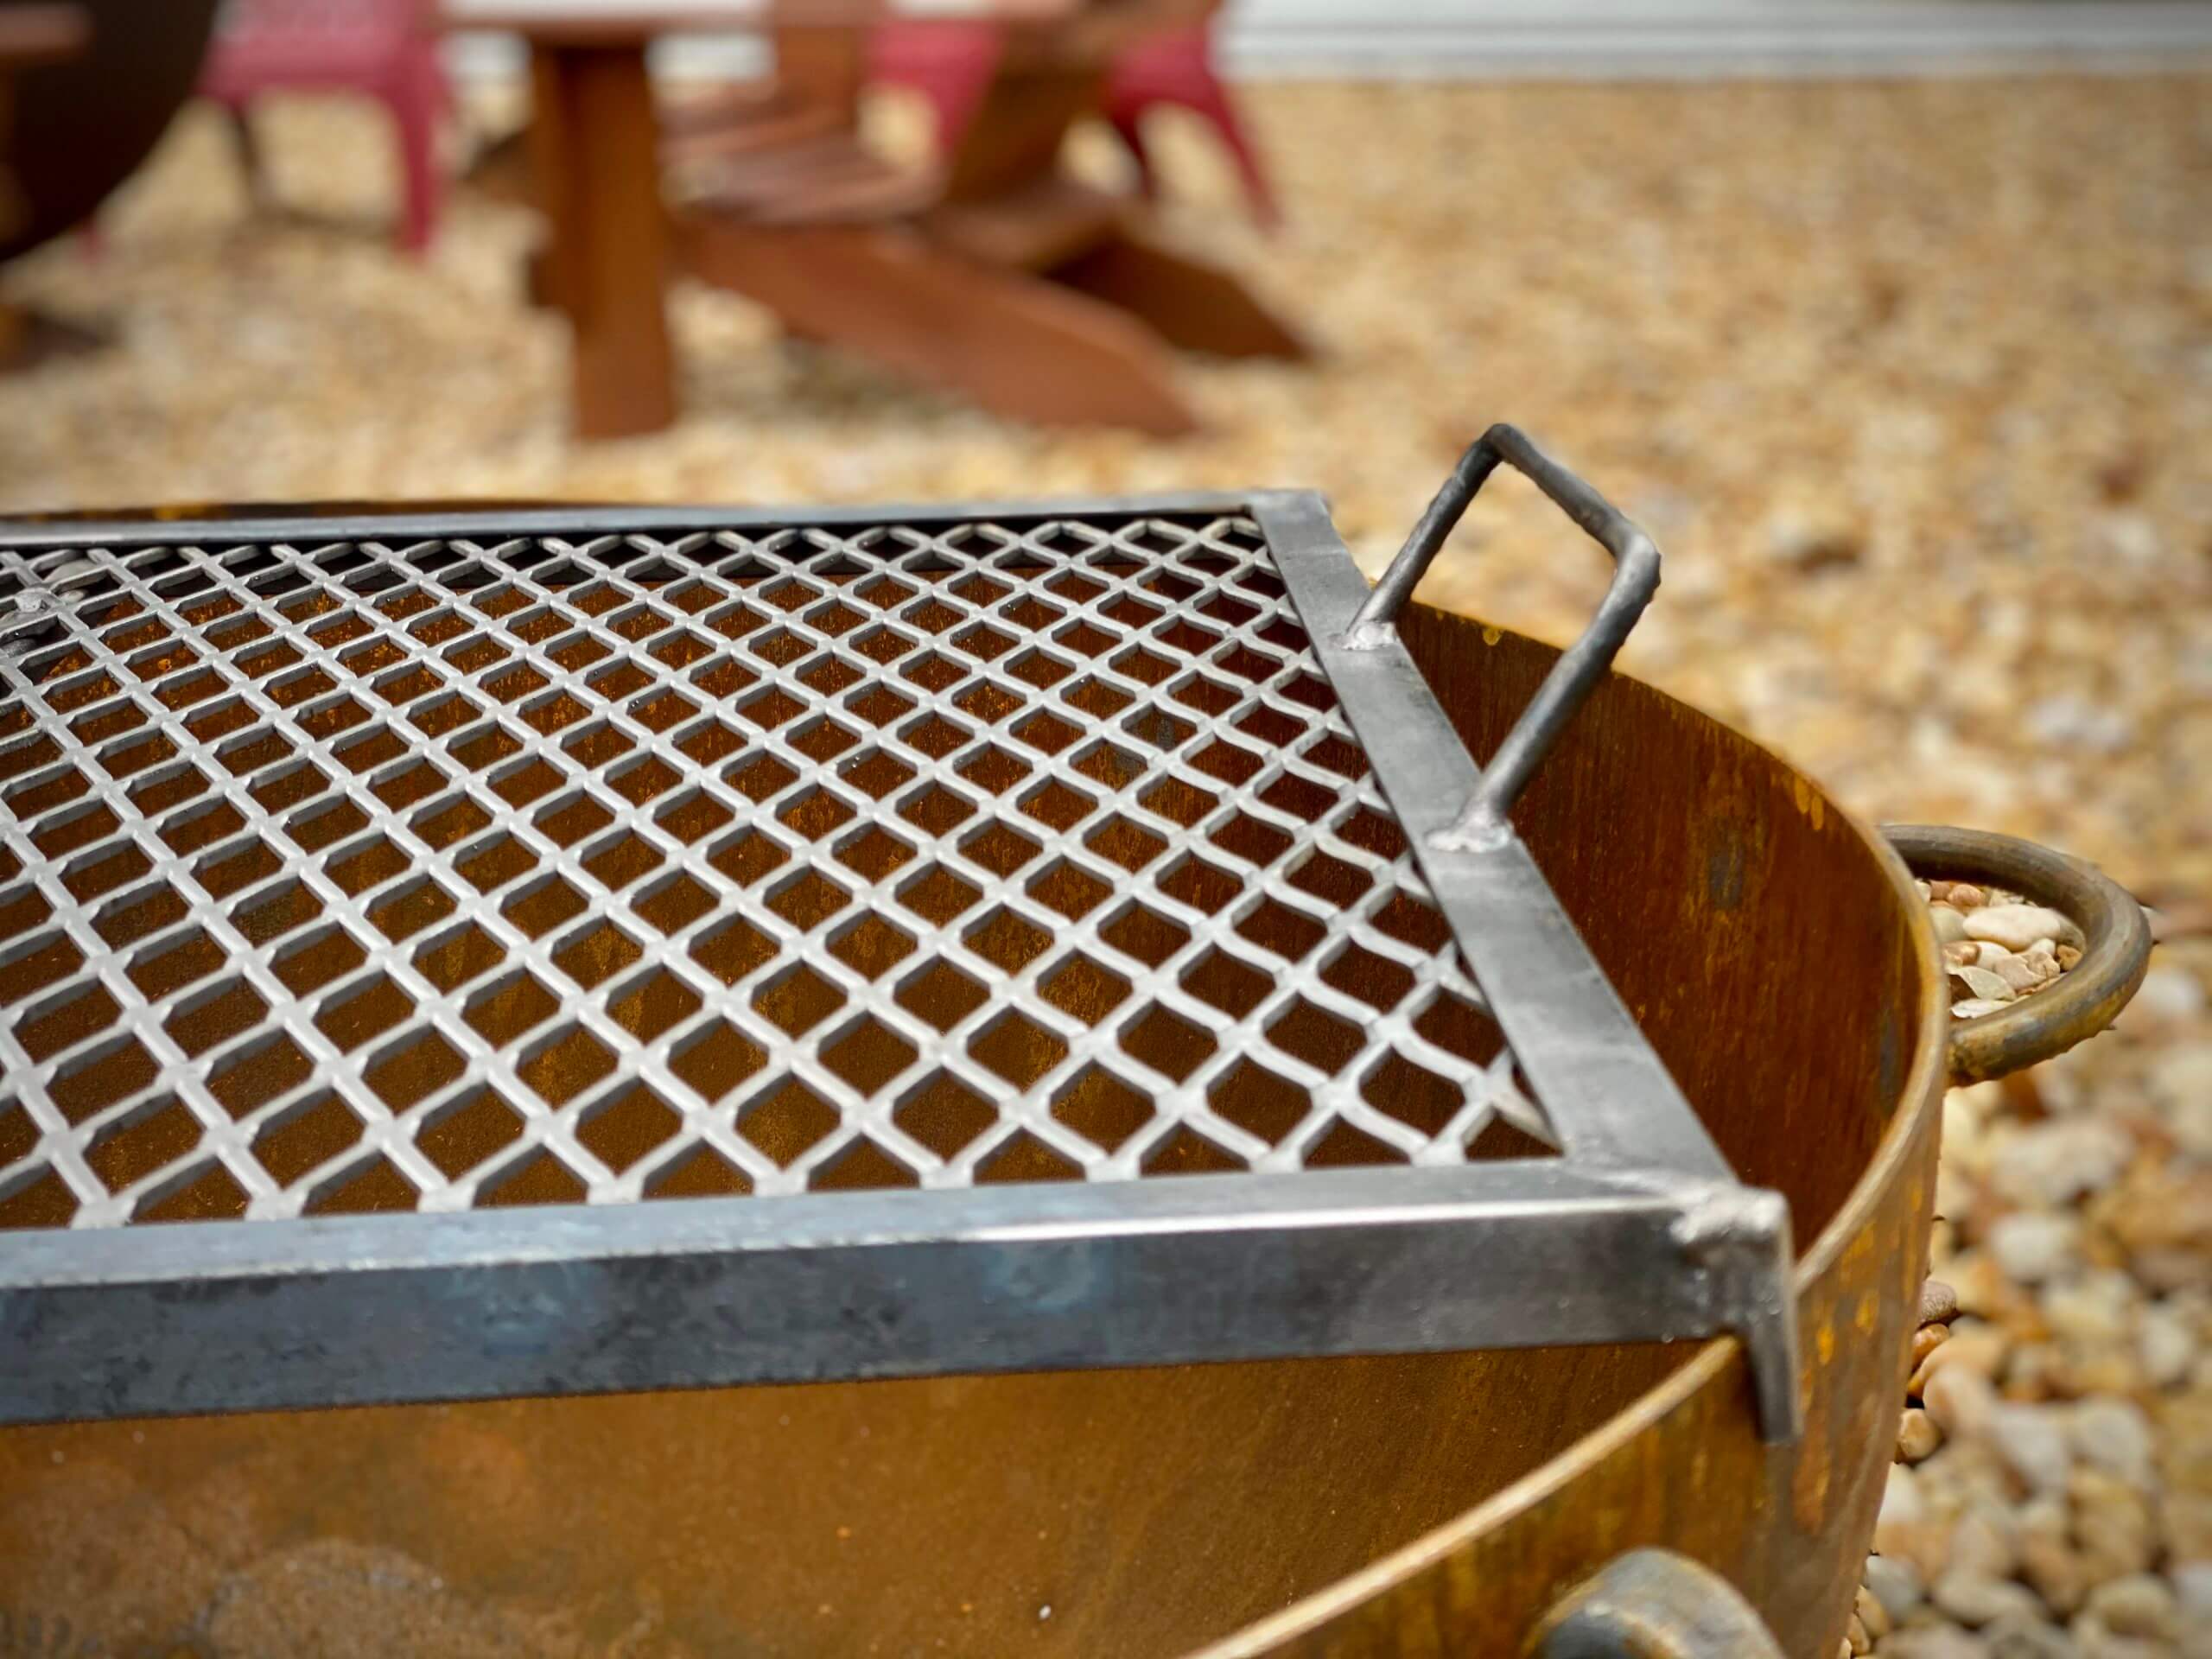 Heavy Duty Handcrafted Fire Pit Cooking Grate Custom Fire Pits Custom Fire Pit For Sale